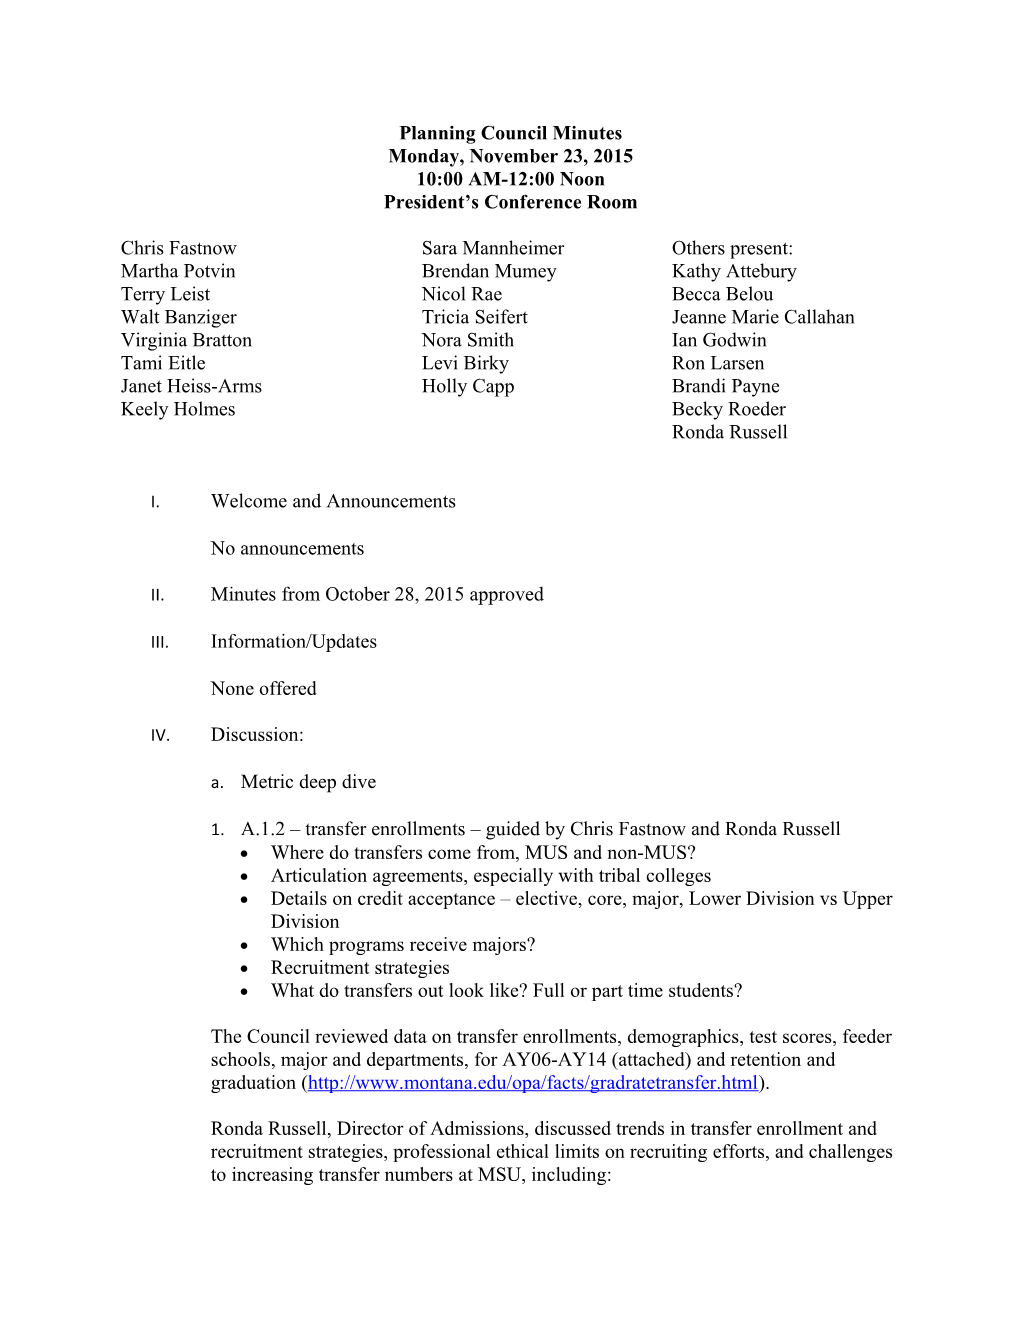 Planning Council Minutes s1